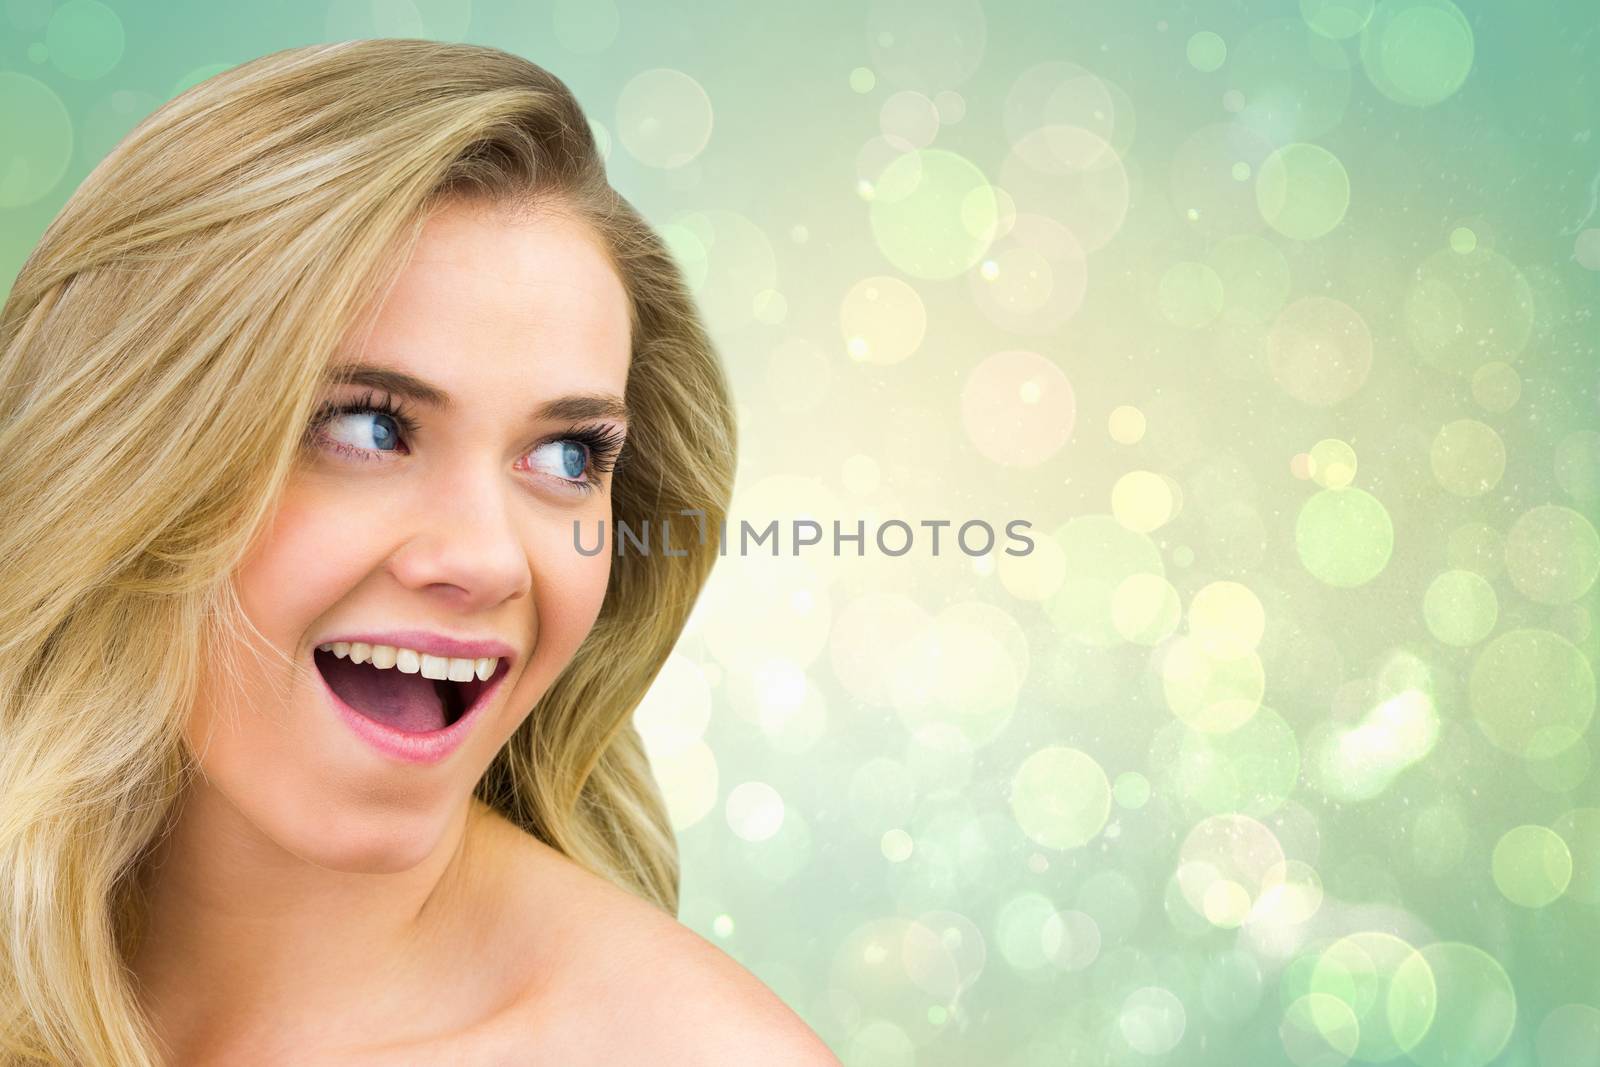 Smiling blonde natural beauty against green abstract light spot design